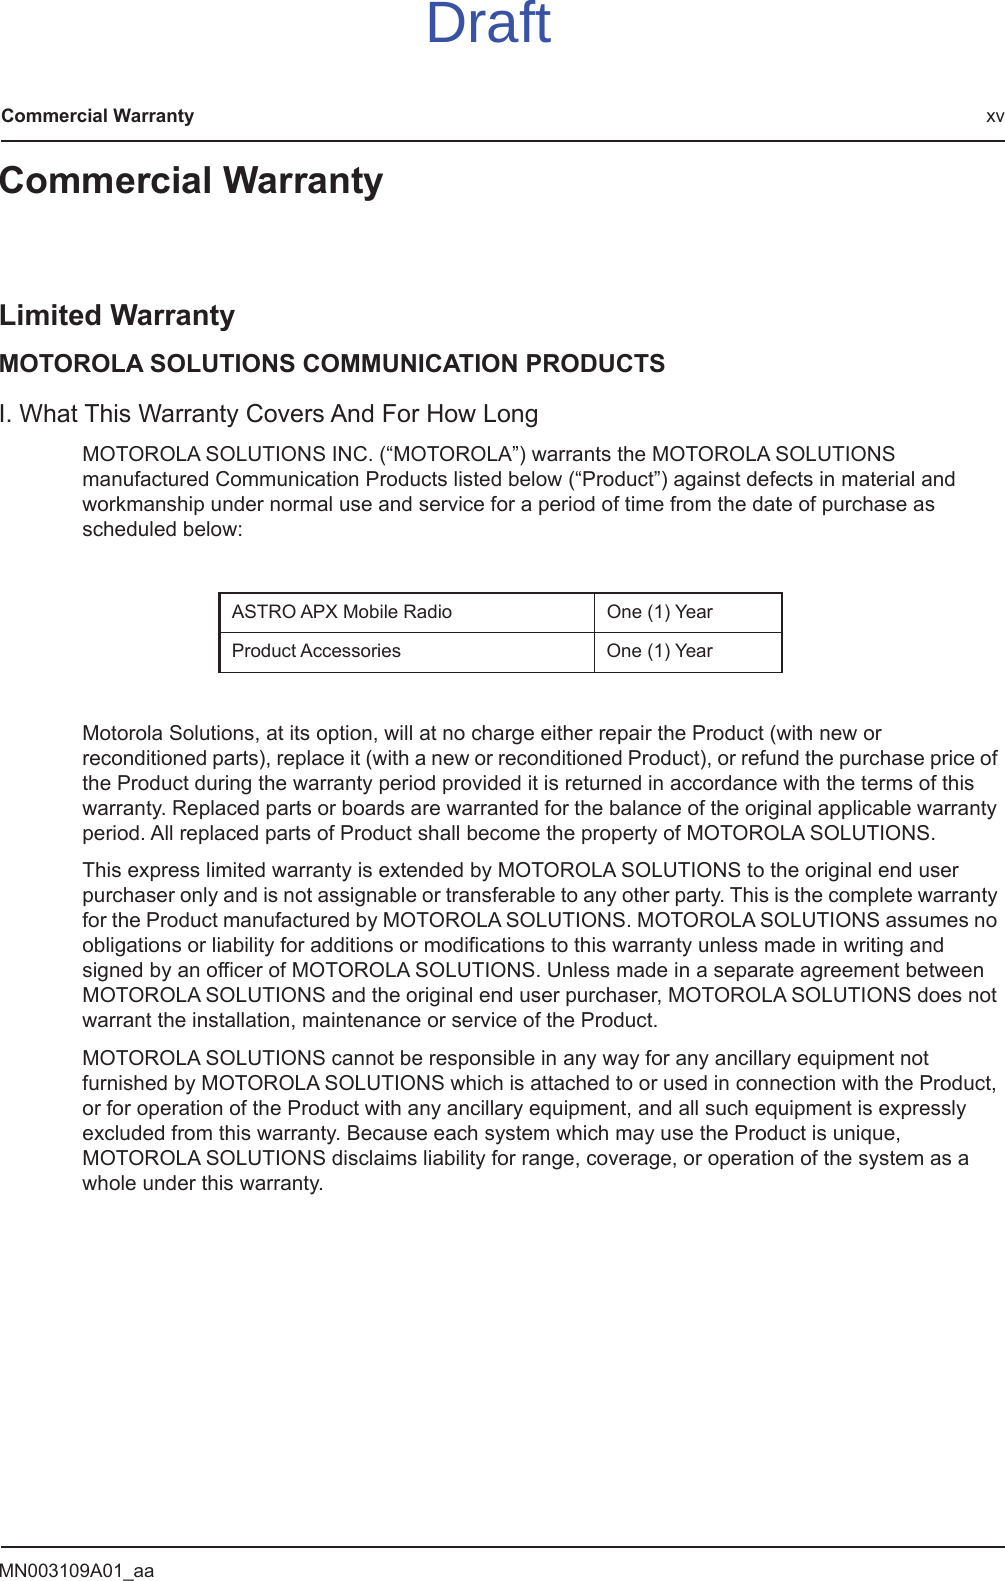 MN003109A01_aaCommercial Warranty xvCommercial WarrantyLimited WarrantyMOTOROLA SOLUTIONS COMMUNICATION PRODUCTSI. What This Warranty Covers And For How LongMOTOROLA SOLUTIONS INC. (“MOTOROLA”) warrants the MOTOROLA SOLUTIONS manufactured Communication Products listed below (“Product”) against defects in material and workmanship under normal use and service for a period of time from the date of purchase as scheduled below:Motorola Solutions, at its option, will at no charge either repair the Product (with new or reconditioned parts), replace it (with a new or reconditioned Product), or refund the purchase price of the Product during the warranty period provided it is returned in accordance with the terms of this warranty. Replaced parts or boards are warranted for the balance of the original applicable warranty period. All replaced parts of Product shall become the property of MOTOROLA SOLUTIONS.This express limited warranty is extended by MOTOROLA SOLUTIONS to the original end user purchaser only and is not assignable or transferable to any other party. This is the complete warranty for the Product manufactured by MOTOROLA SOLUTIONS. MOTOROLA SOLUTIONS assumes no obligations or liability for additions or modifications to this warranty unless made in writing and signed by an officer of MOTOROLA SOLUTIONS. Unless made in a separate agreement between MOTOROLA SOLUTIONS and the original end user purchaser, MOTOROLA SOLUTIONS does not warrant the installation, maintenance or service of the Product.MOTOROLA SOLUTIONS cannot be responsible in any way for any ancillary equipment not furnished by MOTOROLA SOLUTIONS which is attached to or used in connection with the Product, or for operation of the Product with any ancillary equipment, and all such equipment is expressly excluded from this warranty. Because each system which may use the Product is unique, MOTOROLA SOLUTIONS disclaims liability for range, coverage, or operation of the system as a whole under this warranty.ASTRO APX Mobile Radio One (1) YearProduct Accessories One (1) YearDraft